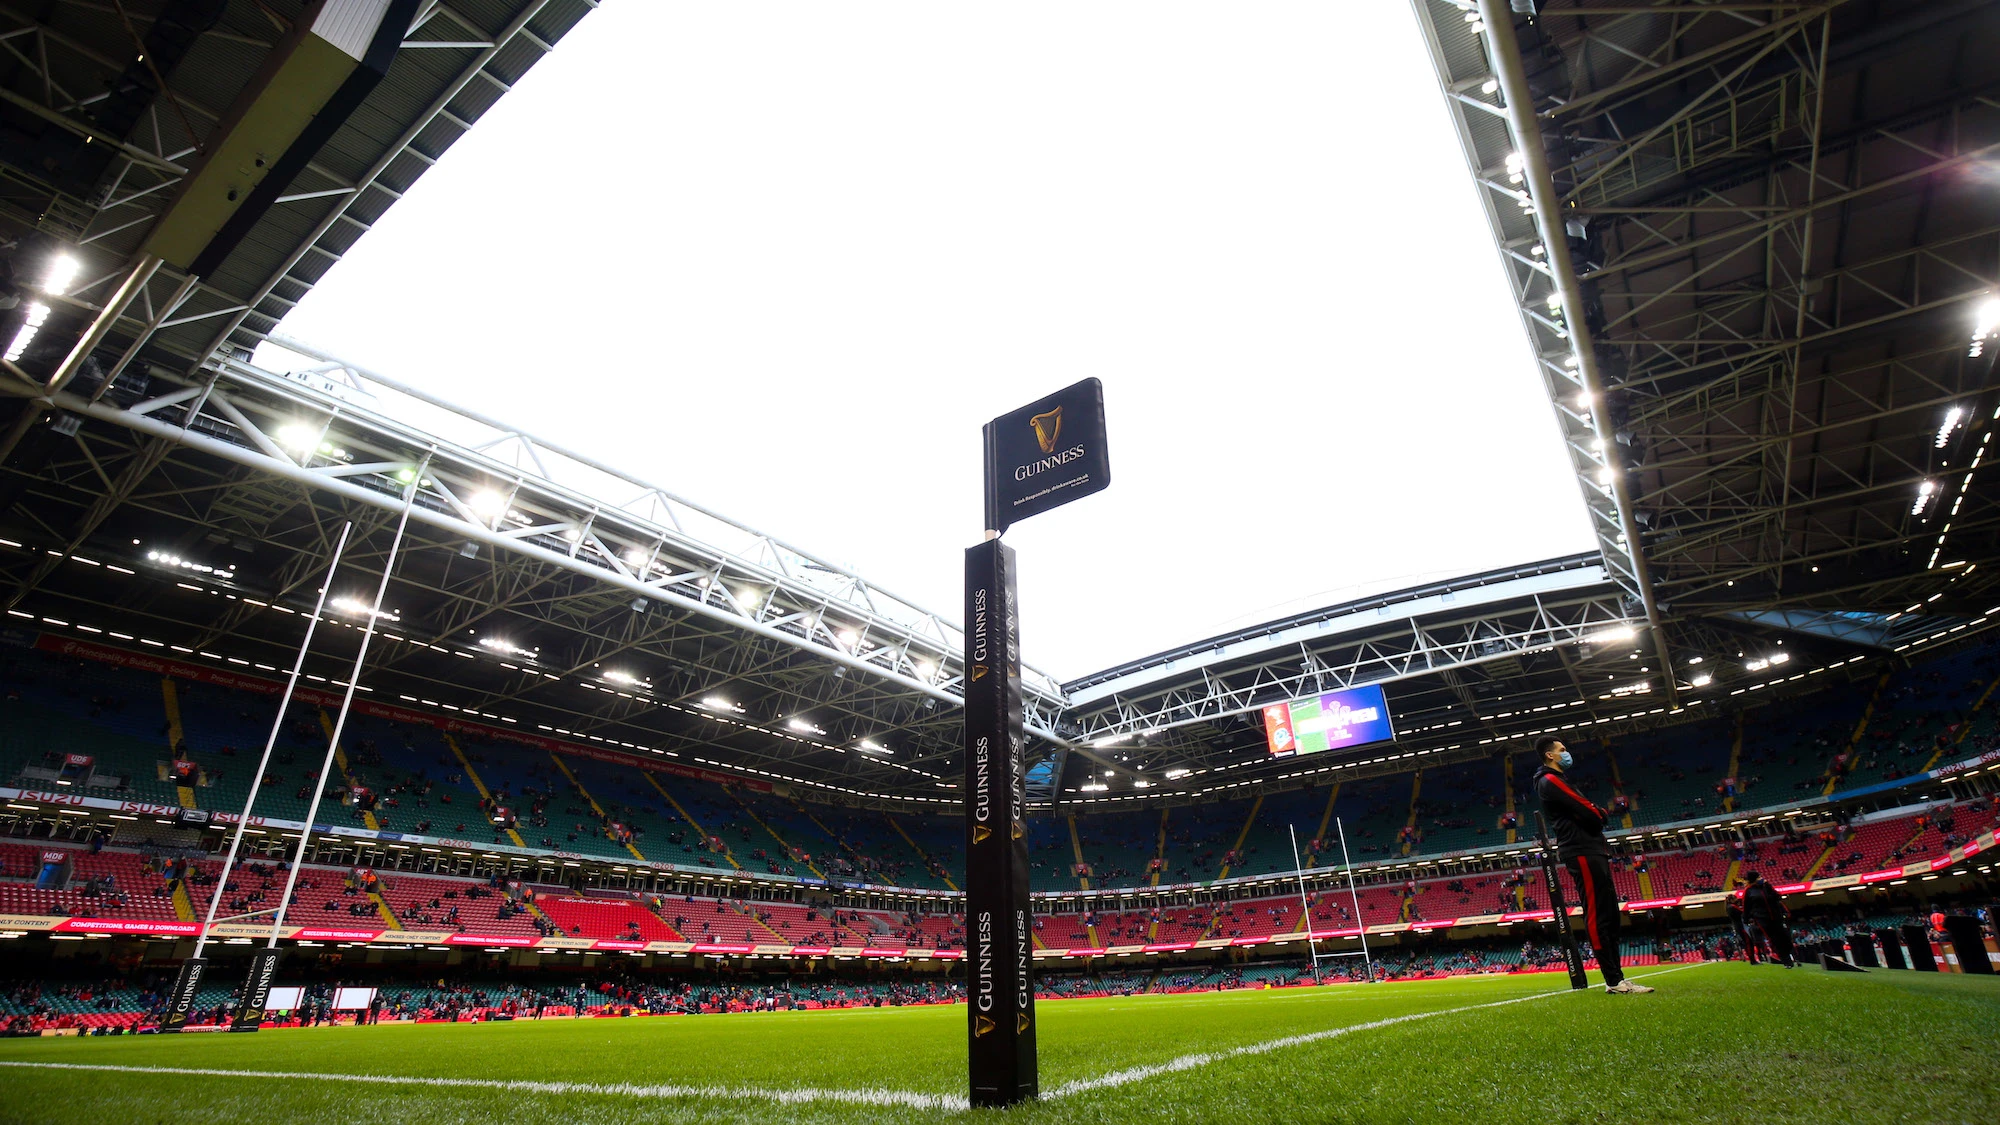 A general view of the Principality Stadium ahead of the game 12/2/2022